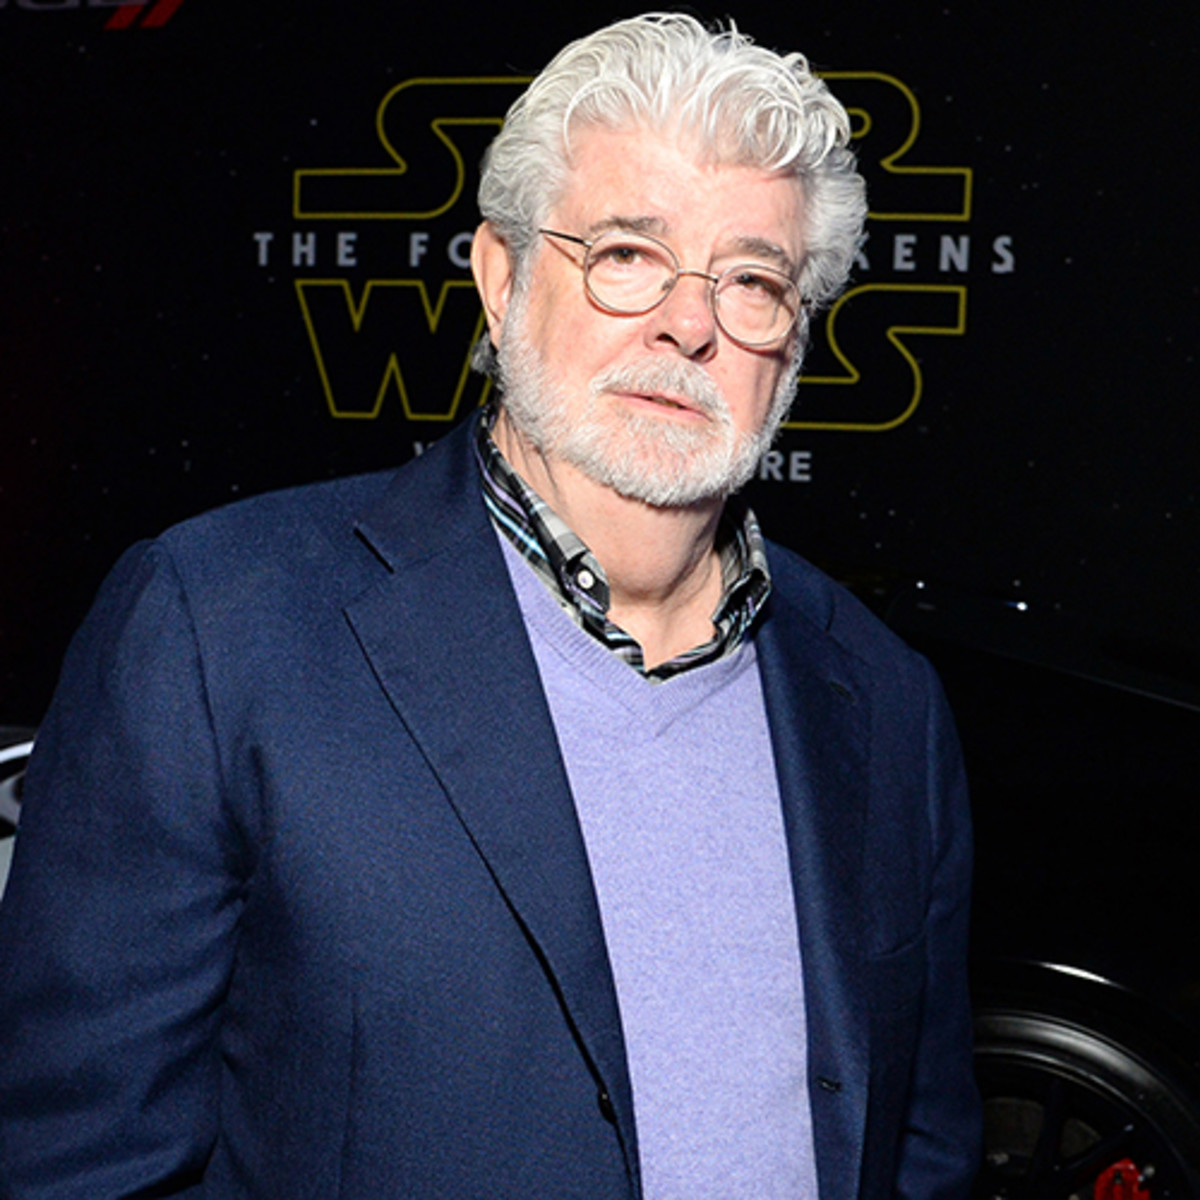 You’ll Only Pass This General Knowledge Quiz If You Know 10% Of Everything George Lucas